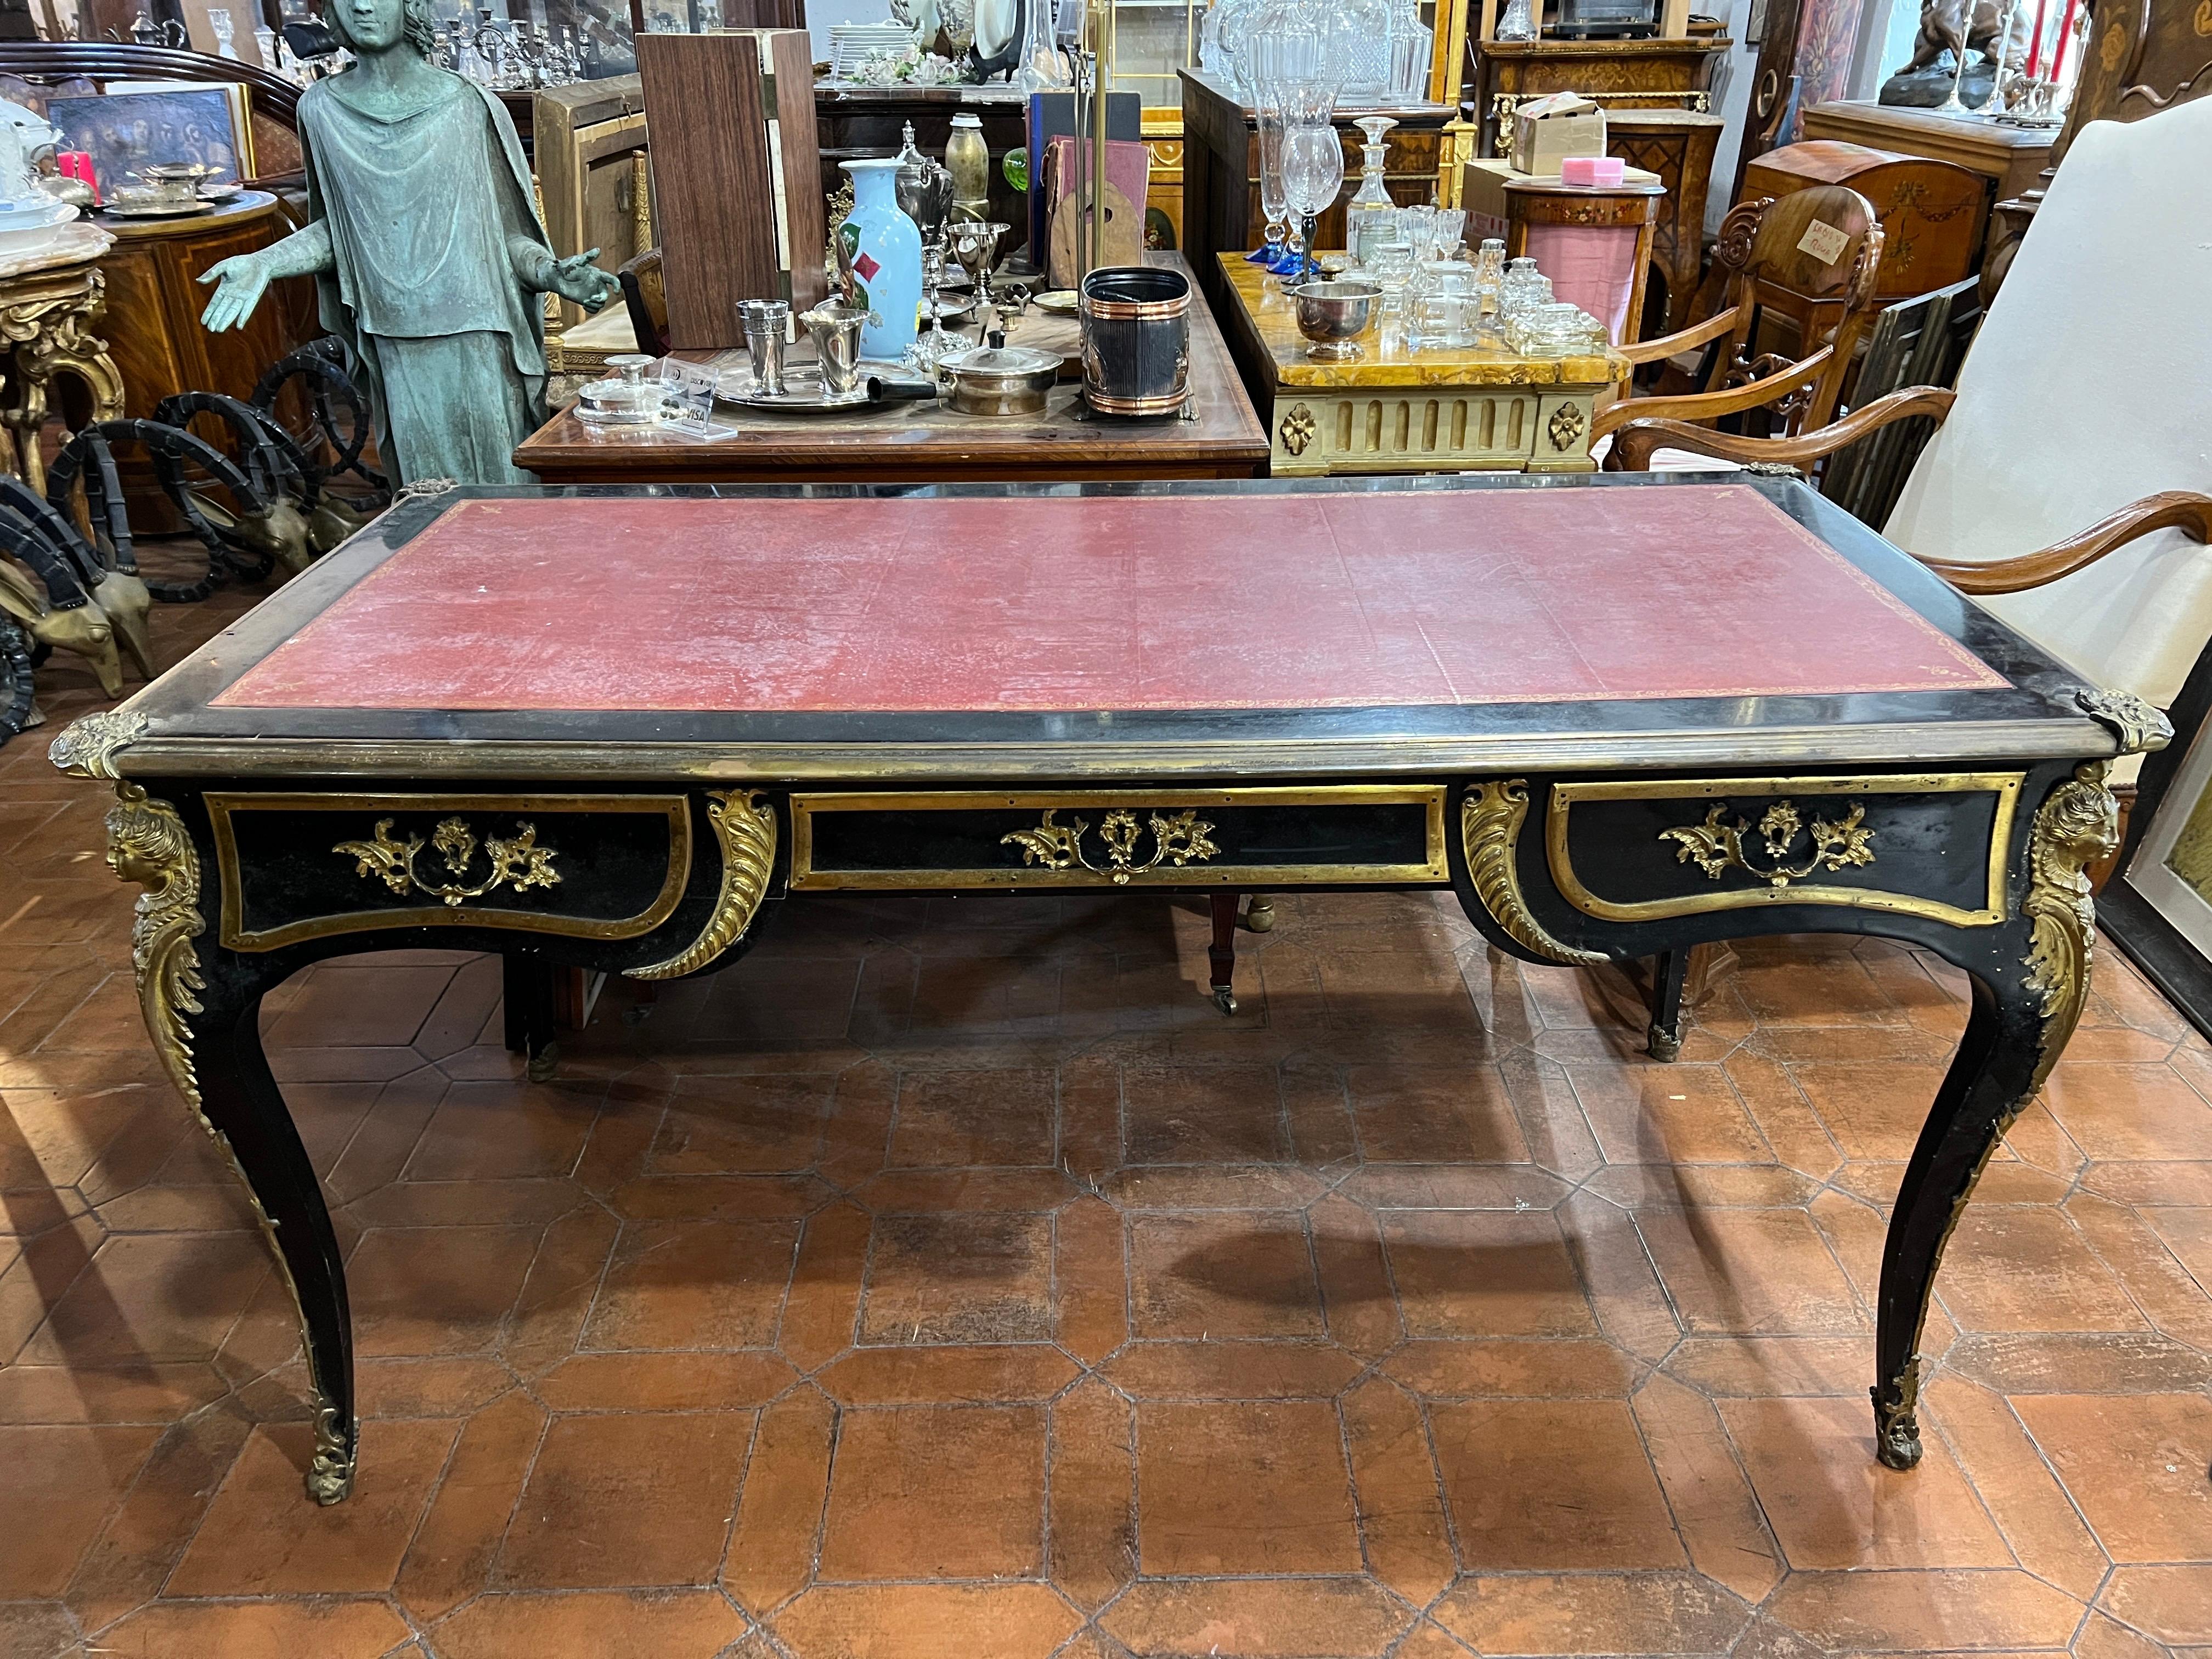 Fantastic and rare French Bureau Plat writing desk from the late LUIGI XV era , circa 1840.
This is an important writing desk, the bureau plat originated in the French Louis XV period to be the representative writing desk of the French Nobles and